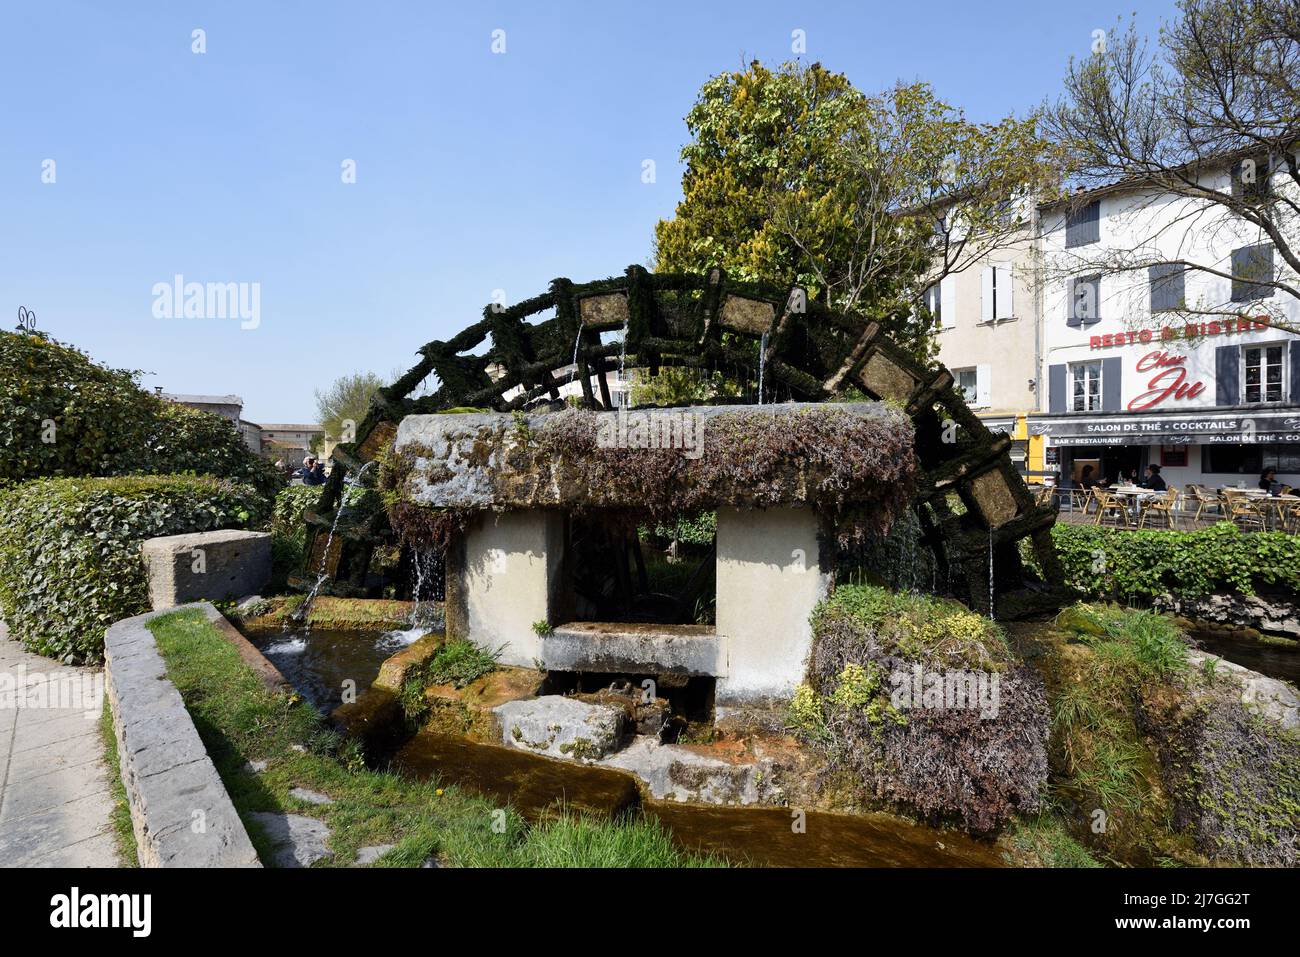 Historic Wooden Water Wheel or Waterwheel on the River Sorgue in L'Isle-sur-la-Sorgue Vaucluse Provence France Stock Photo